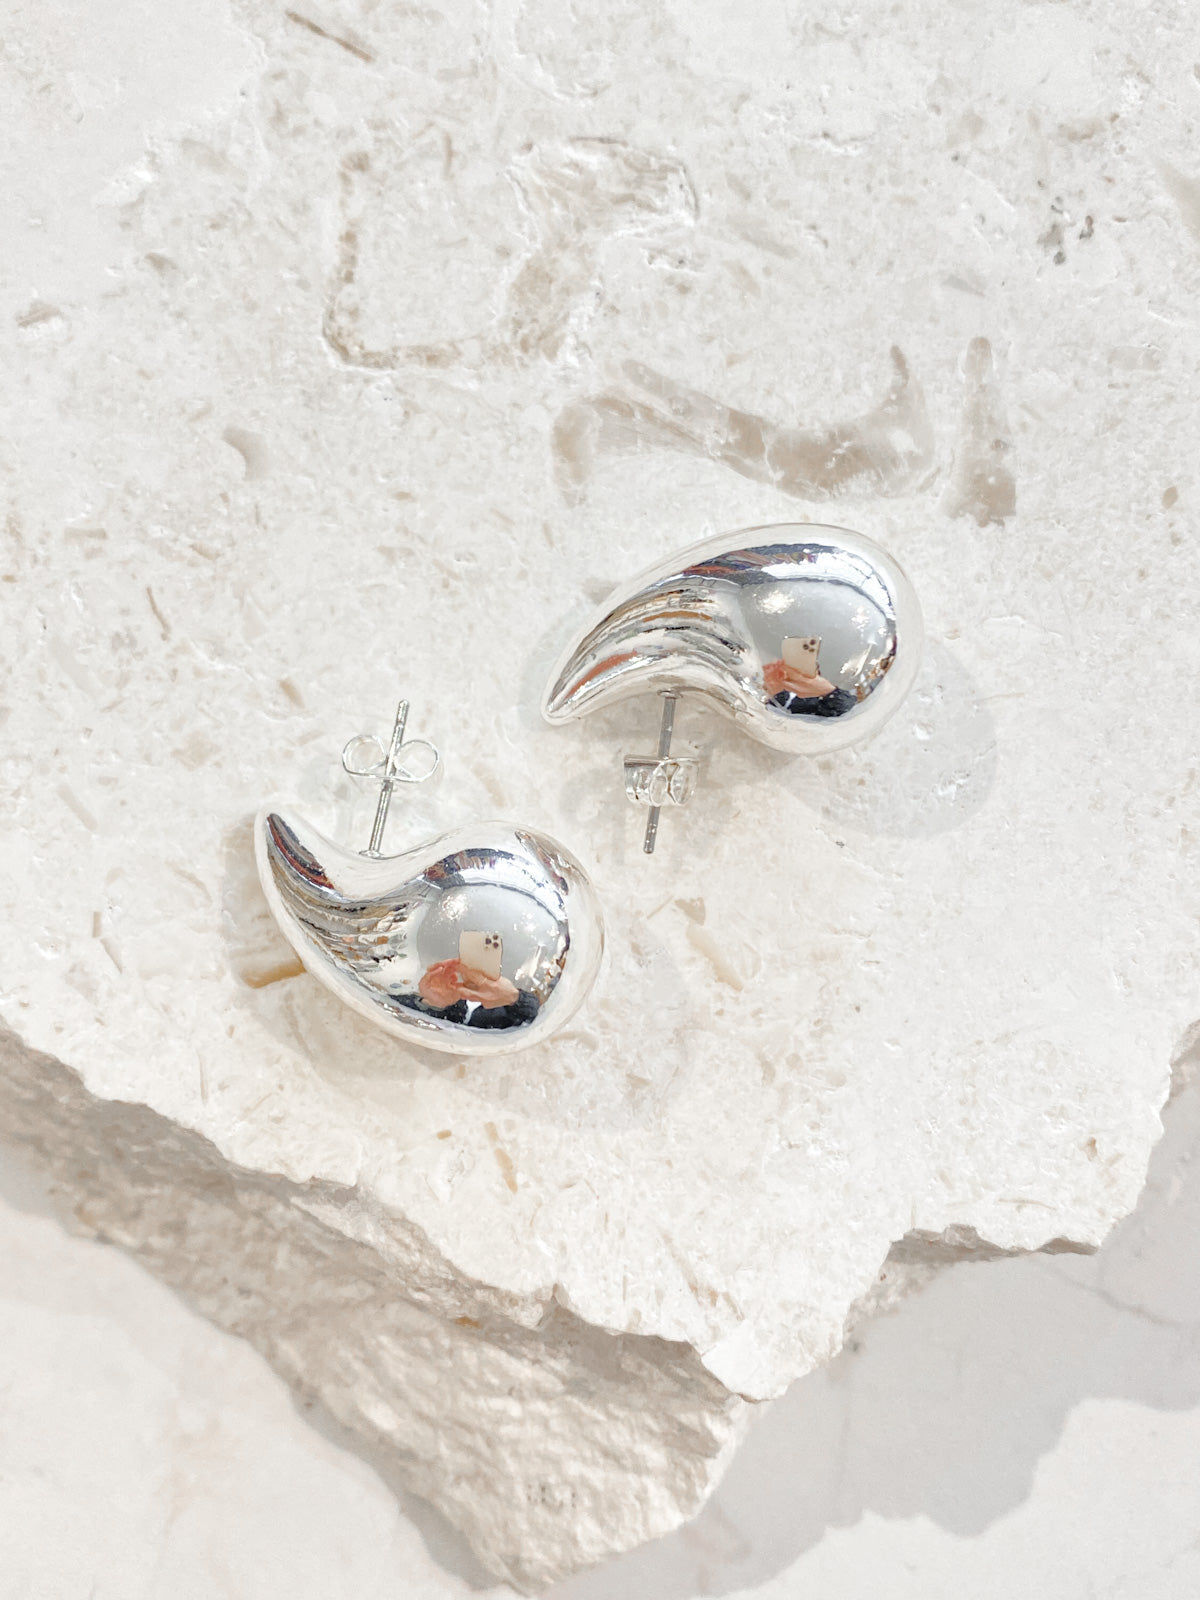 Small Droplet Sterling Silver Plated Earrings